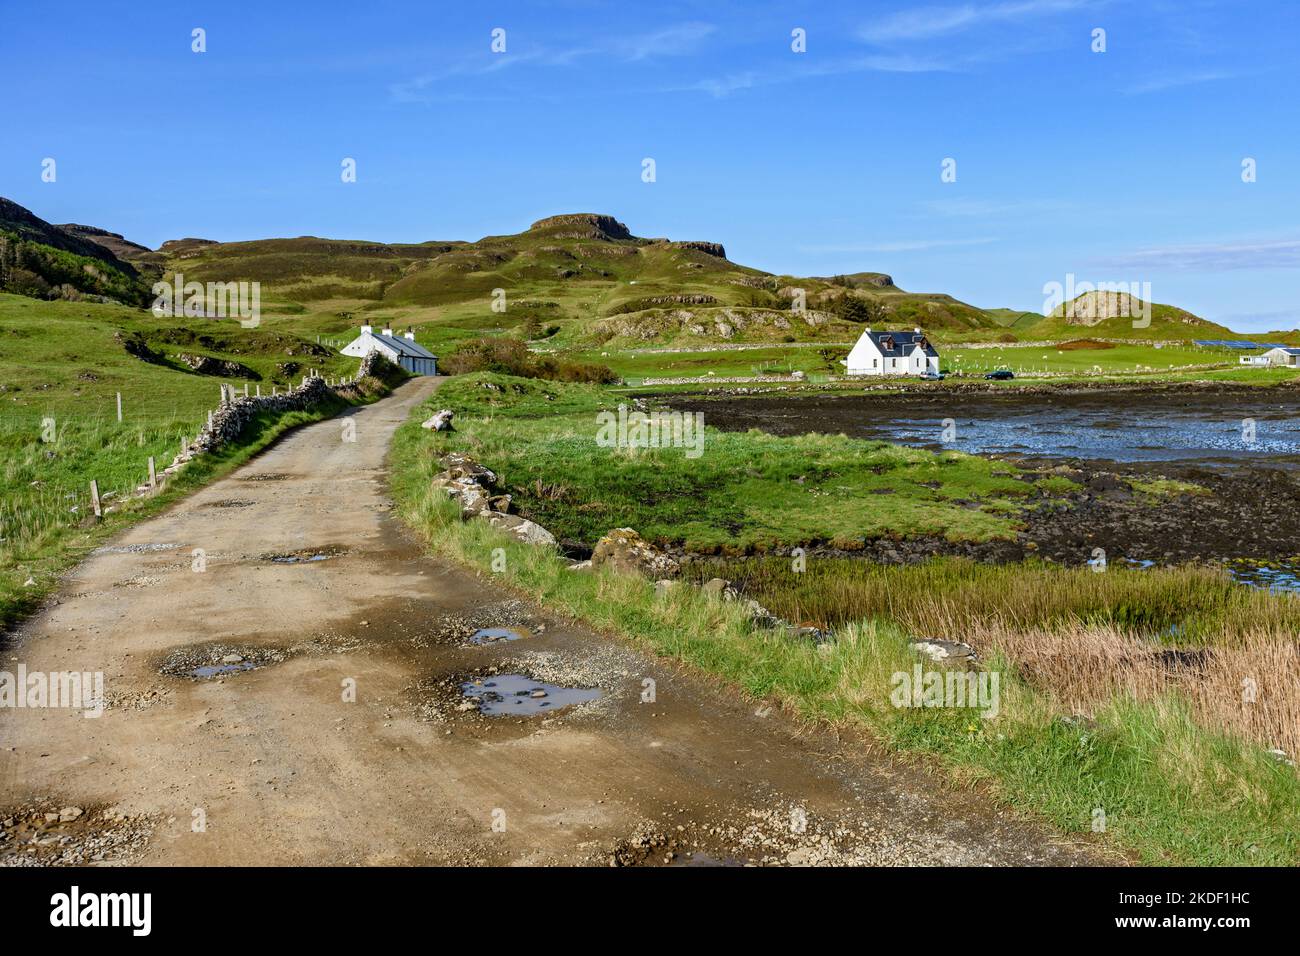 Compass Hill from the track running past the settlement of A' Chill, Isle of Canna, Scotland, UK Stock Photo